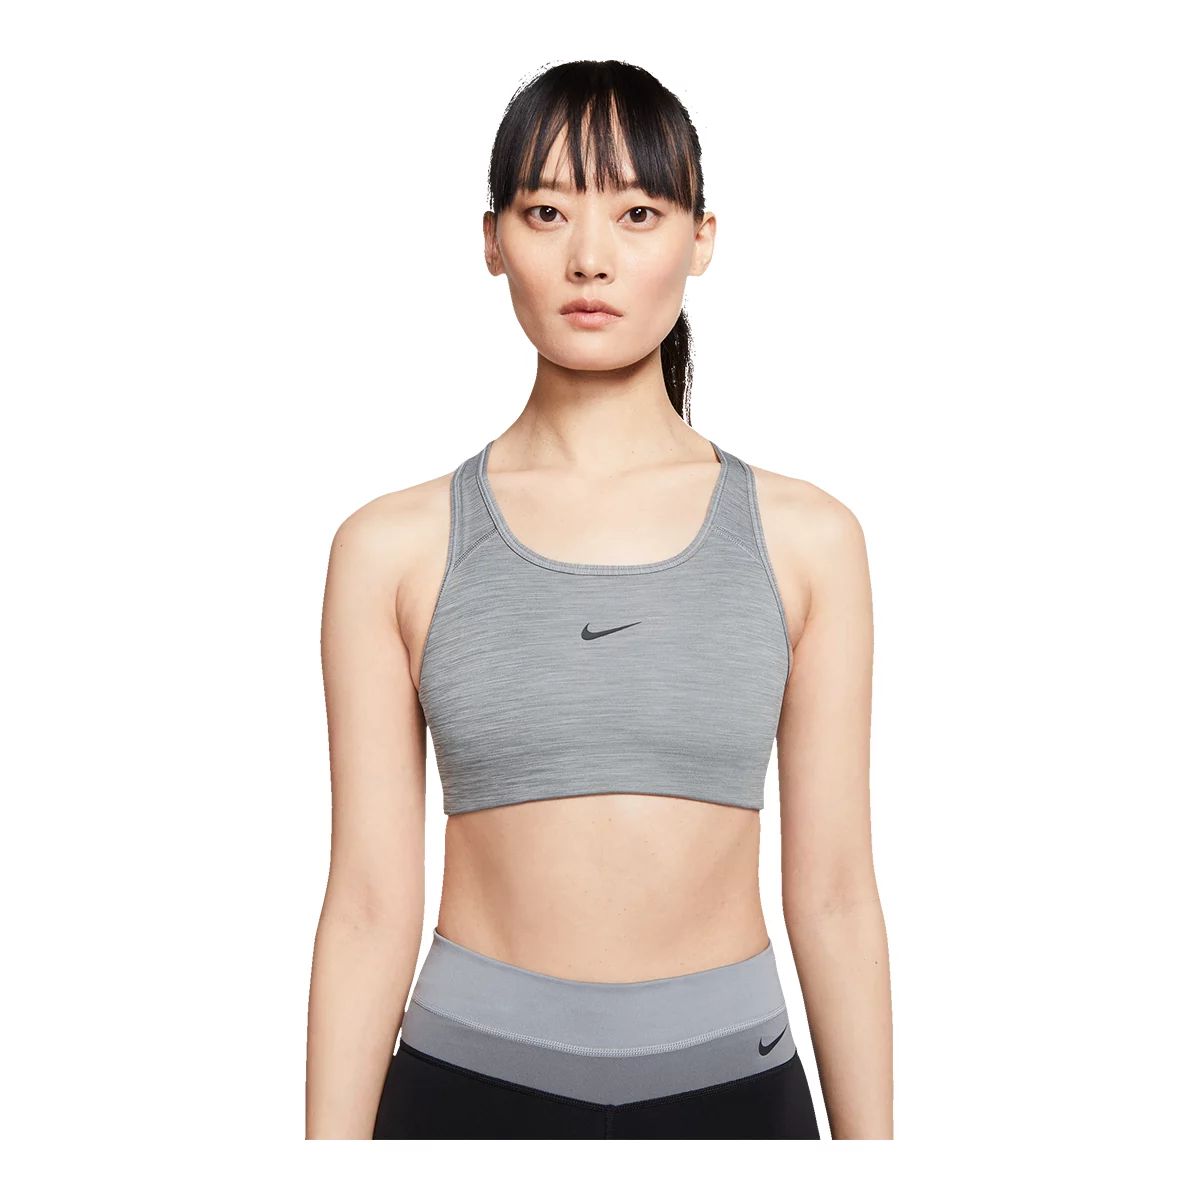 Stay stylish and comfortable with Nike Women's Retro Sports Bra